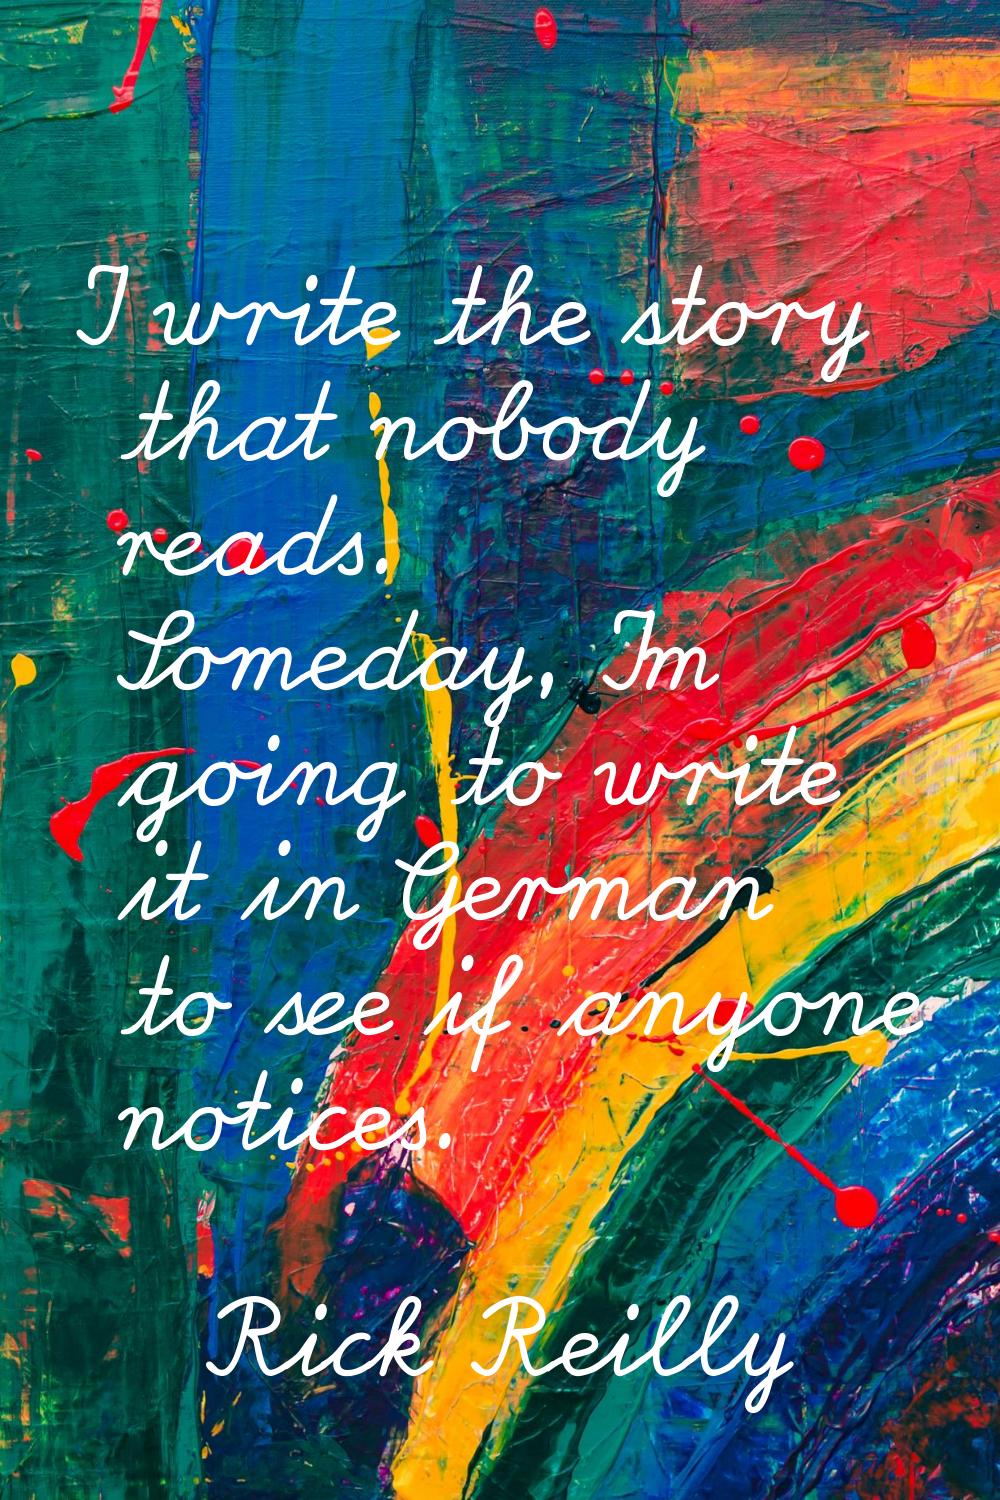 I write the story that nobody reads. Someday, I'm going to write it in German to see if anyone noti